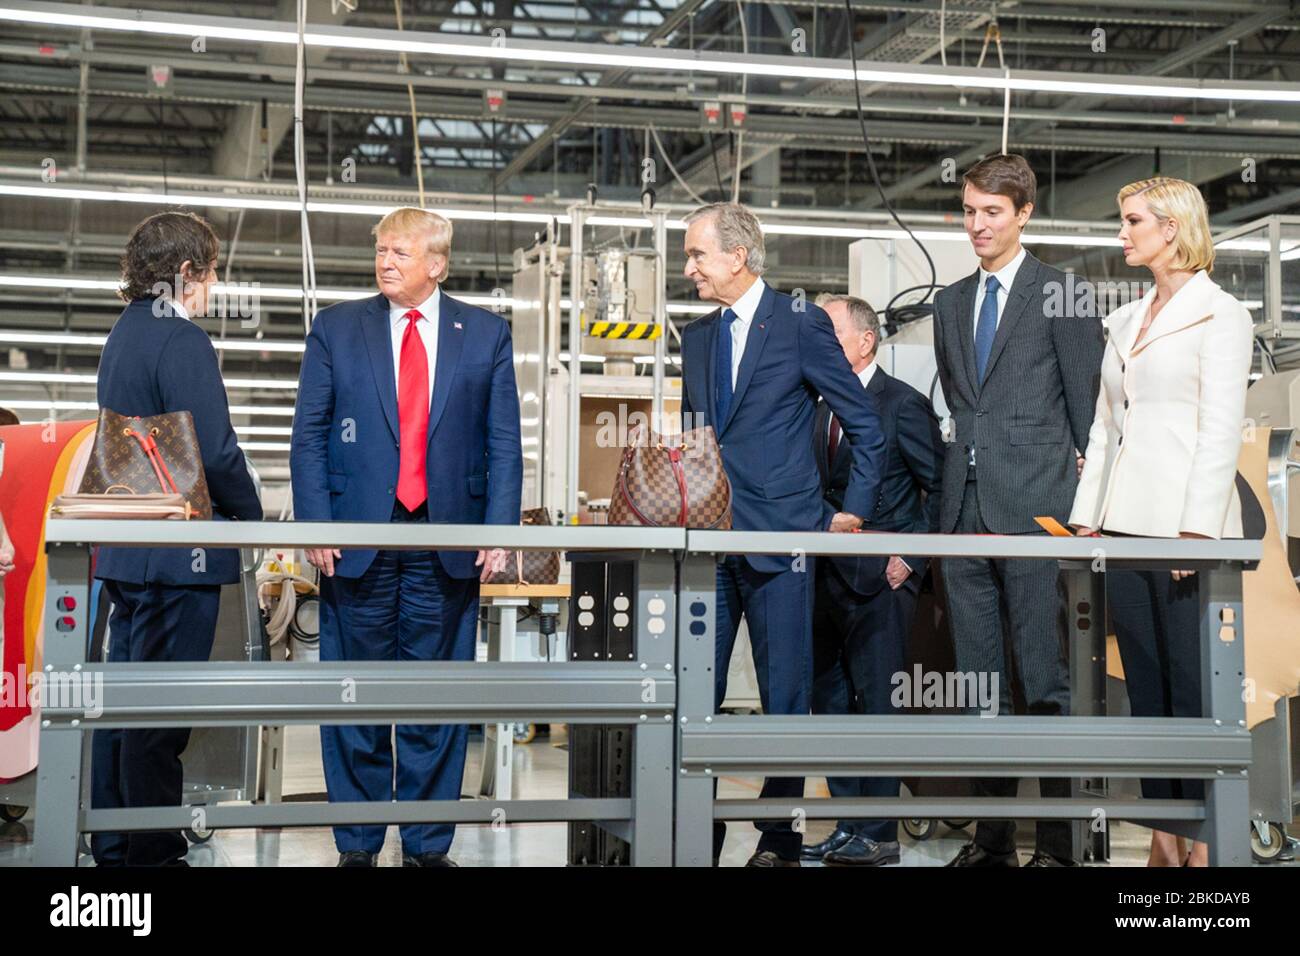 President Donald Trump is joined by Bernard Arnault CEO of LVMH